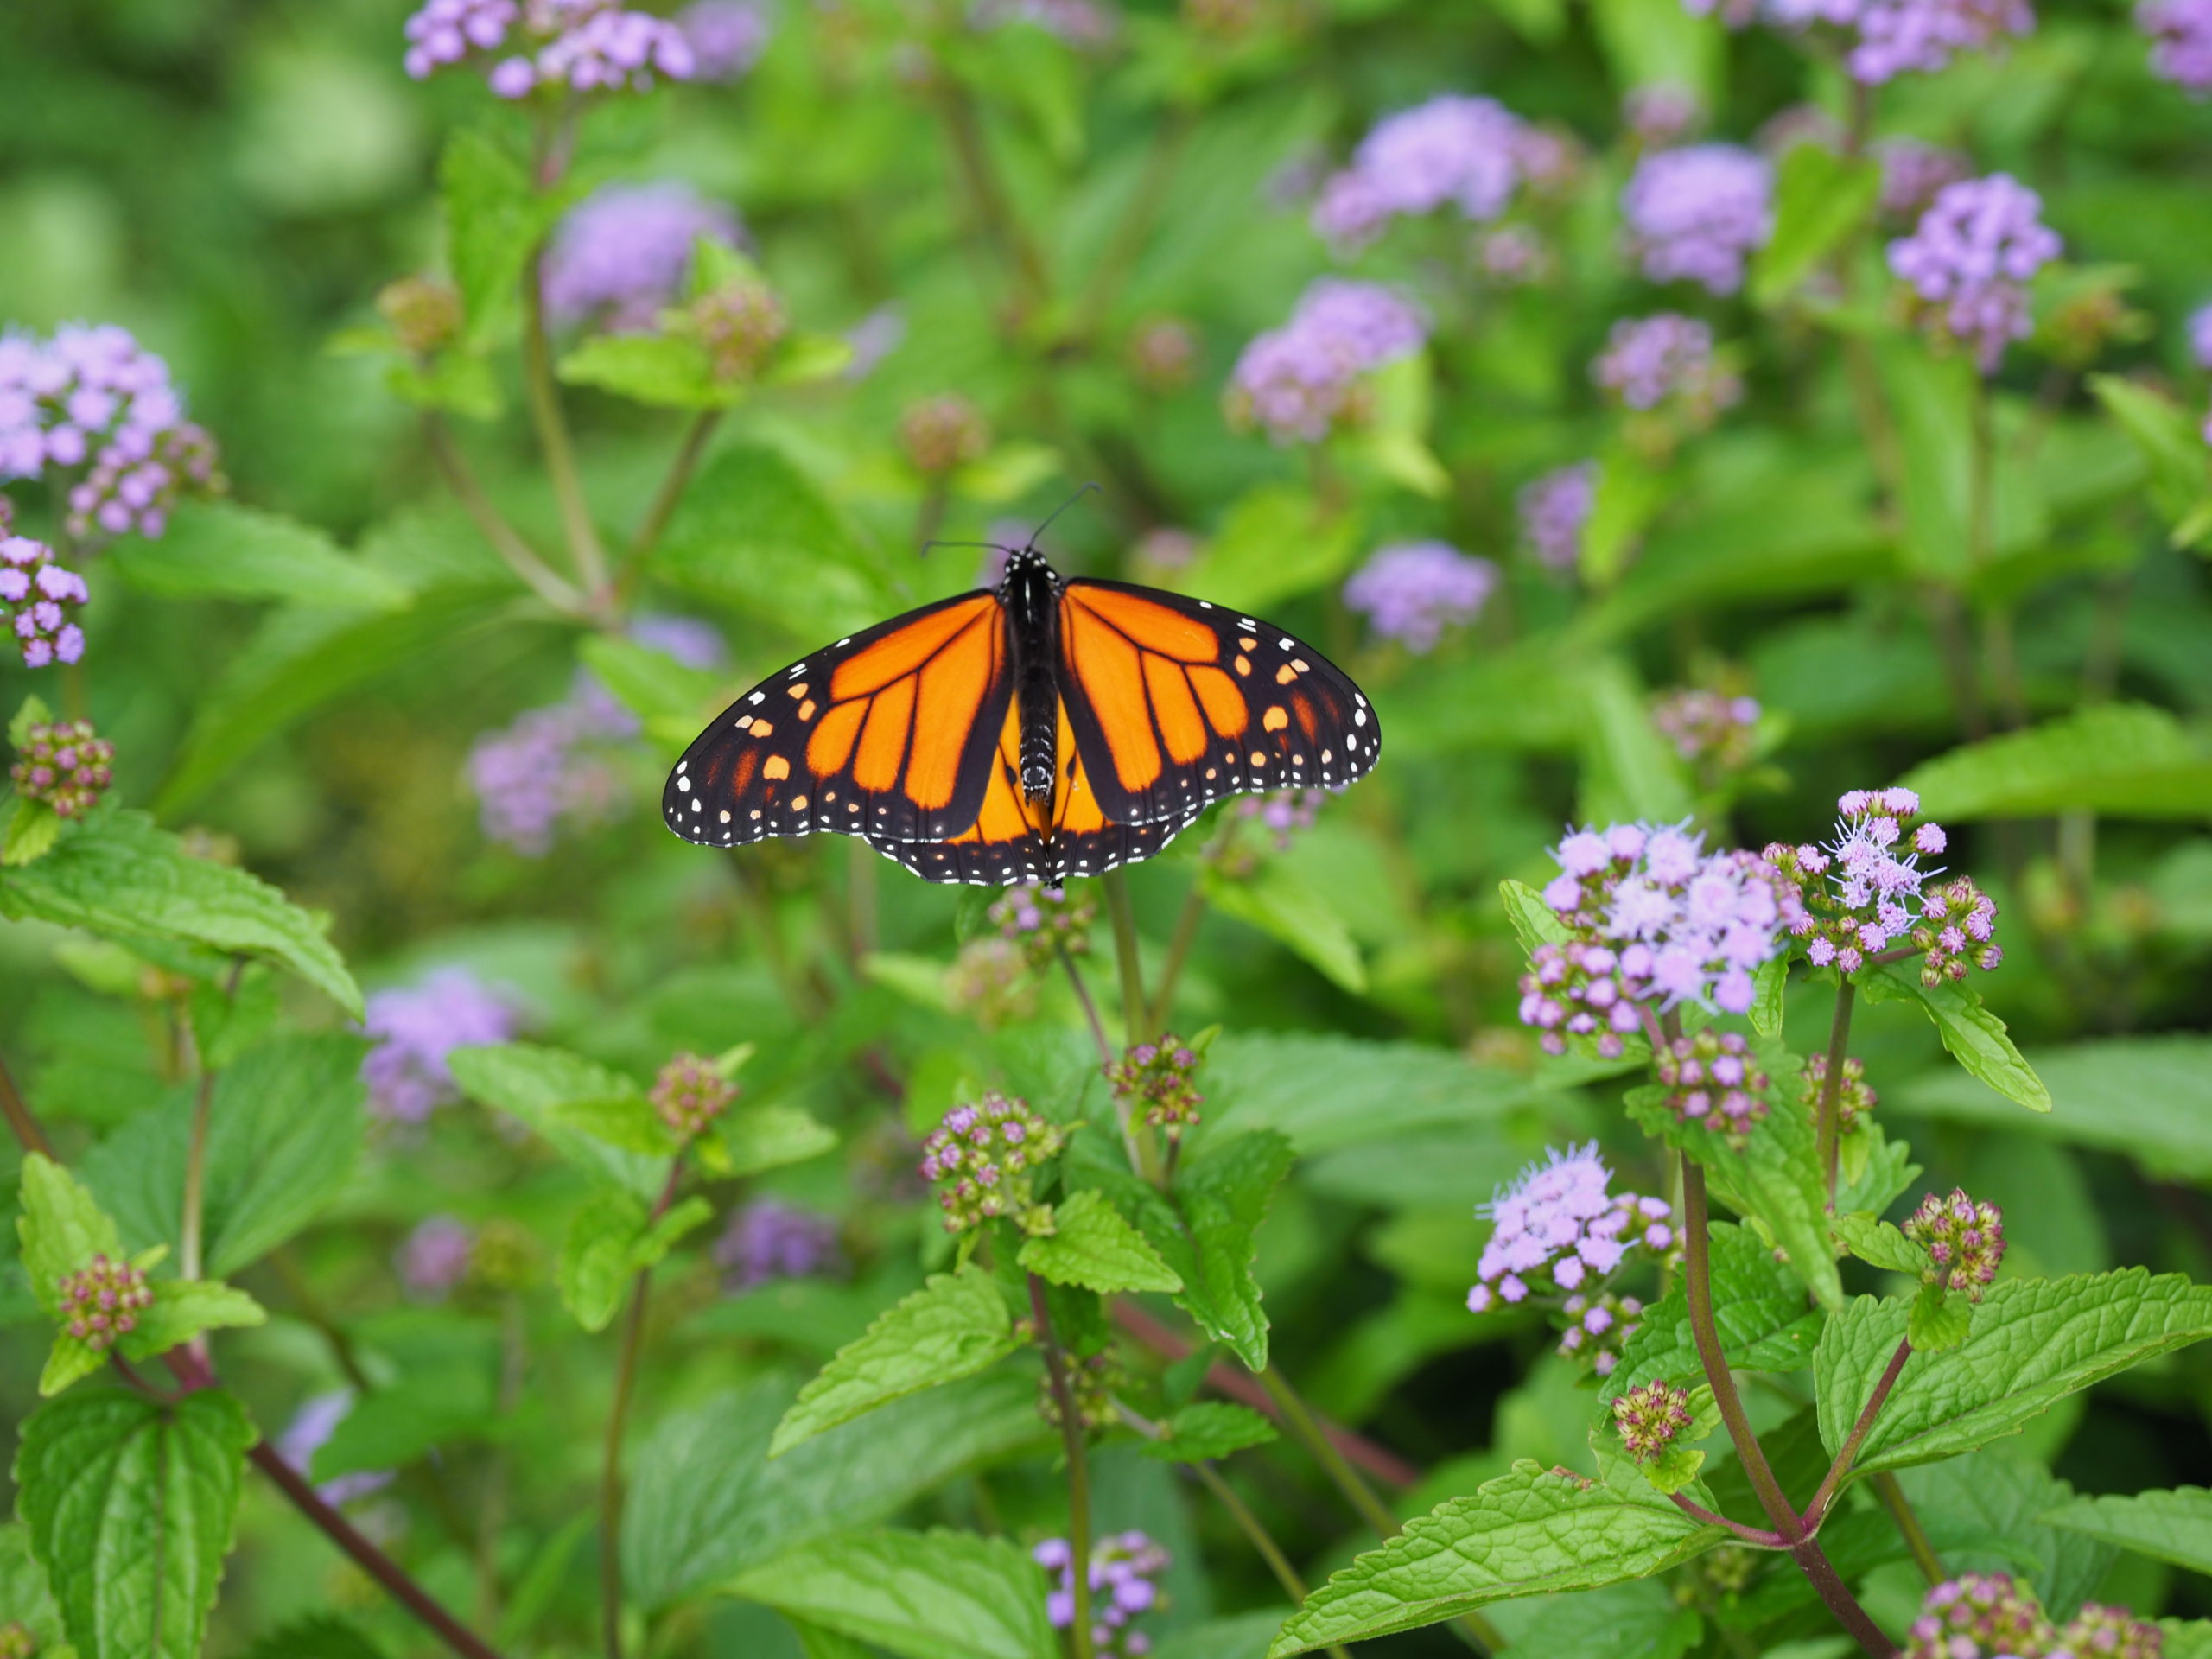 This monarch butterfly spent most of an afternoon in the flowers of the blue mistflower.